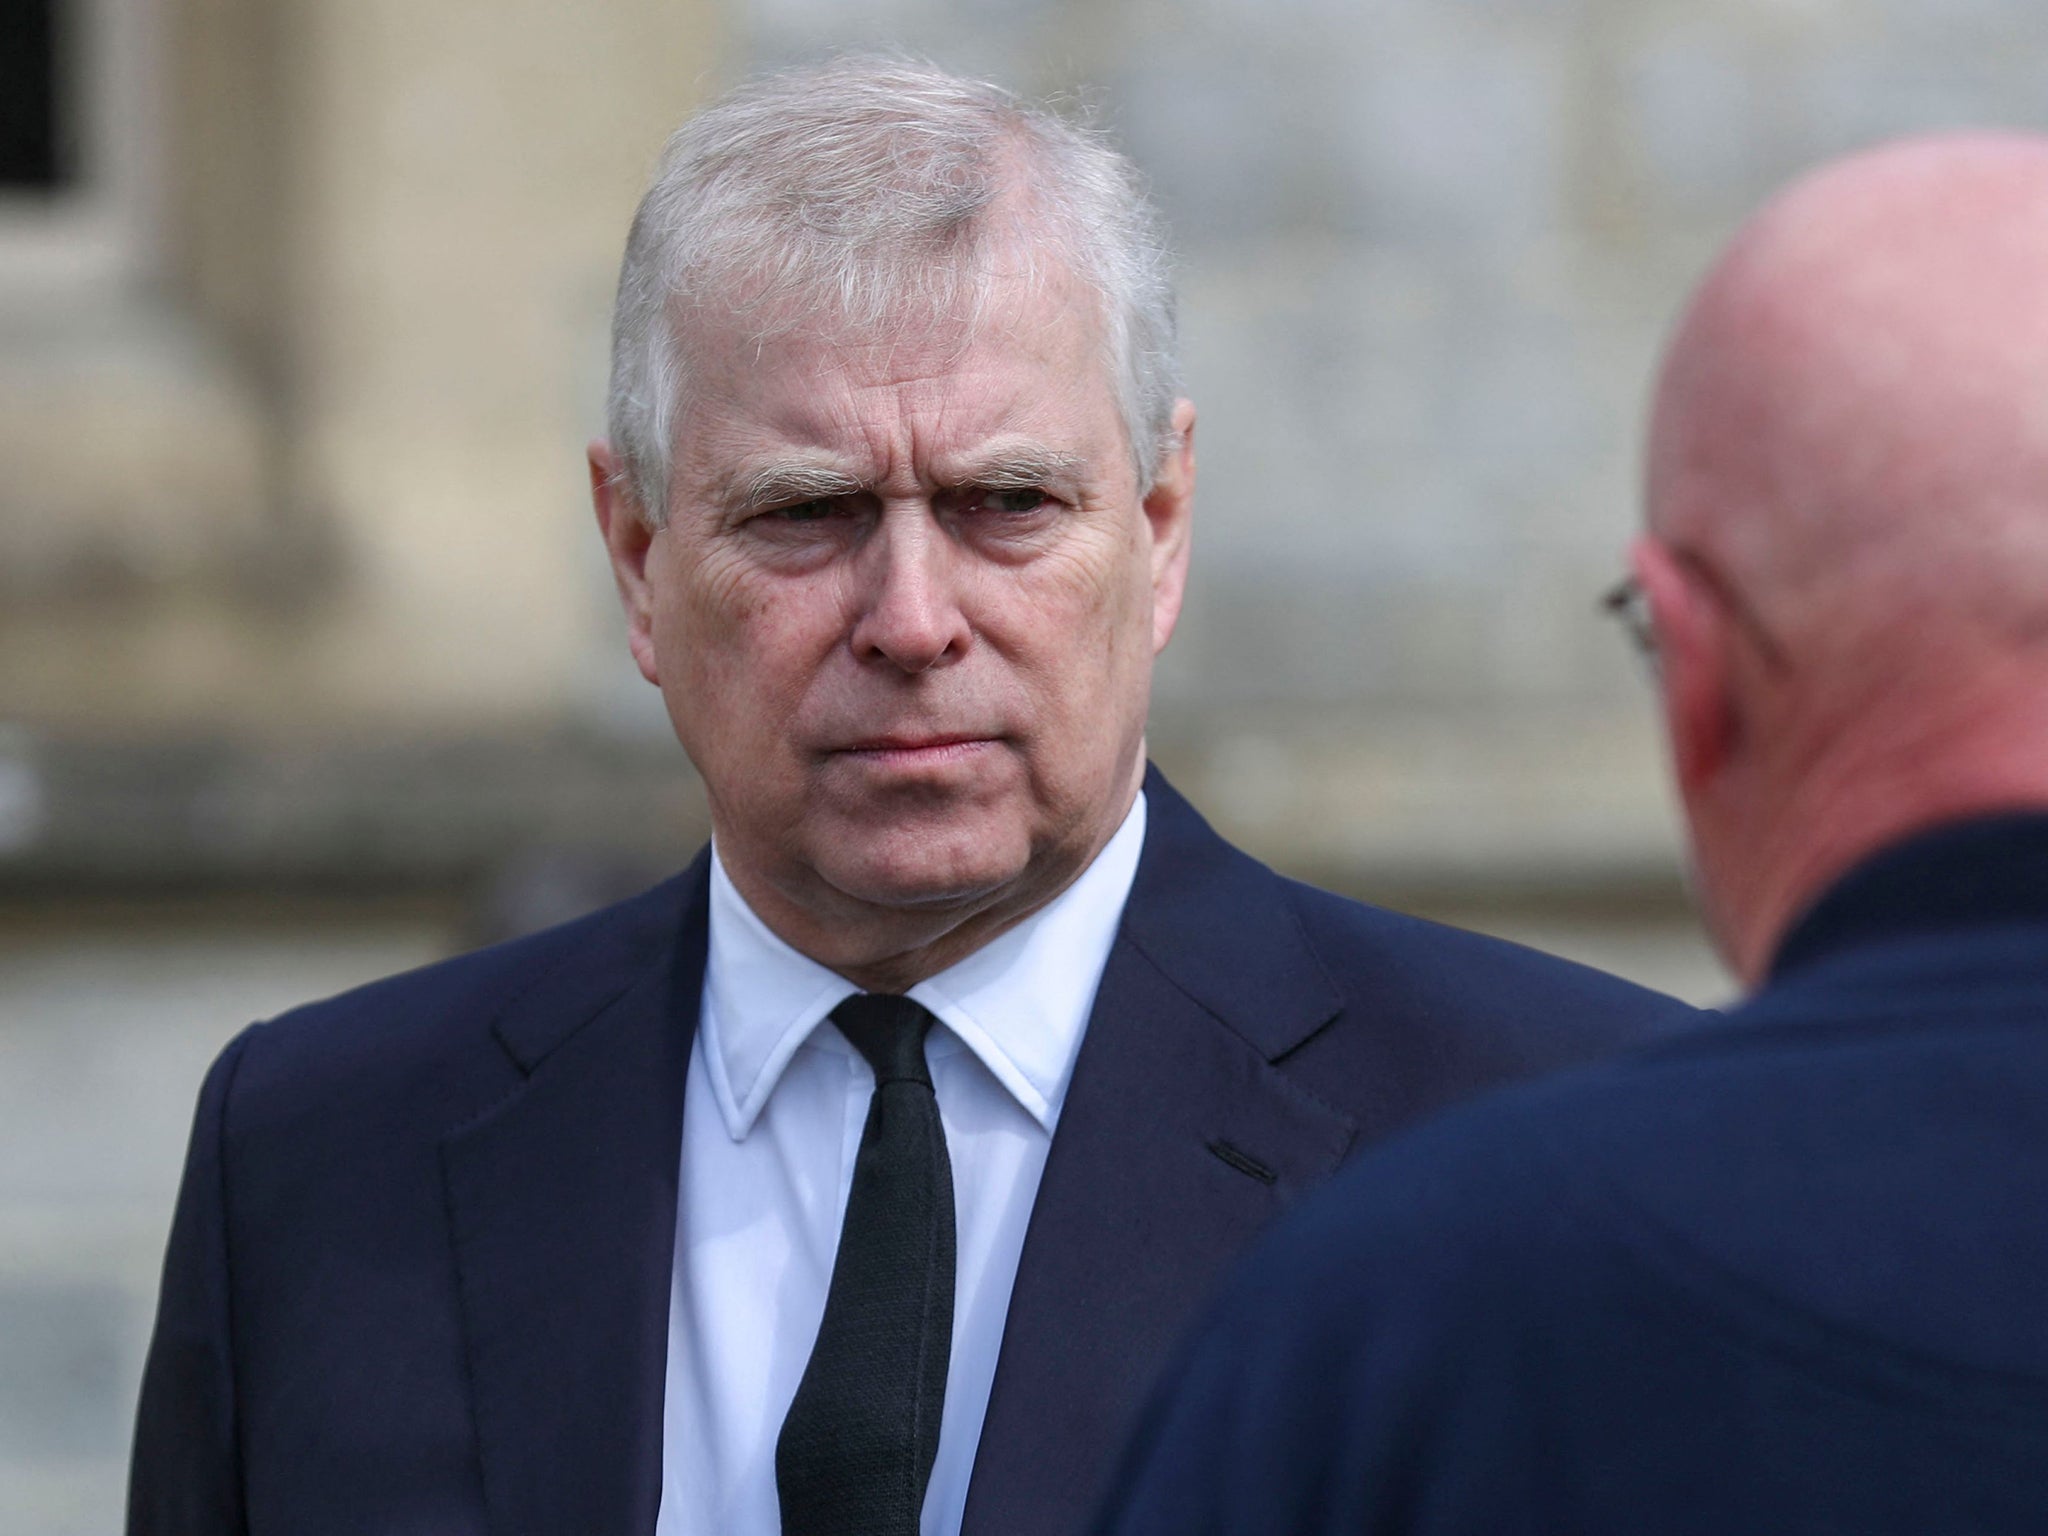 Prince Andrew stayed at Epstein’s Manhattan for five days in 2010